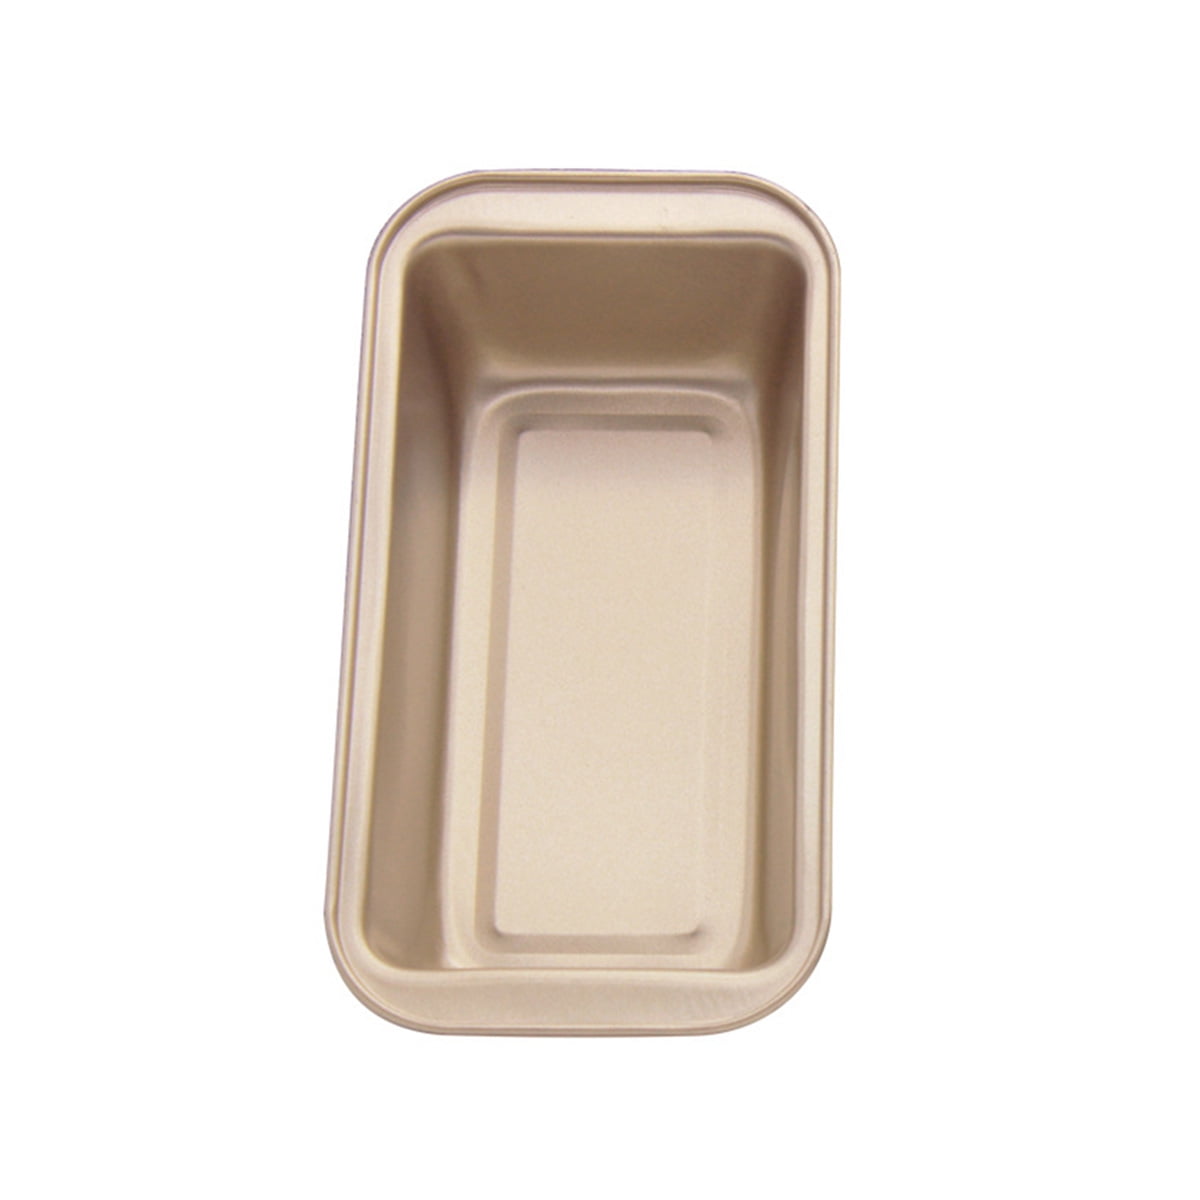 Details about   Non-stick Silicone Cake Baking Mold Toast Bread Loaf Tin Bakeware Pan Mould 